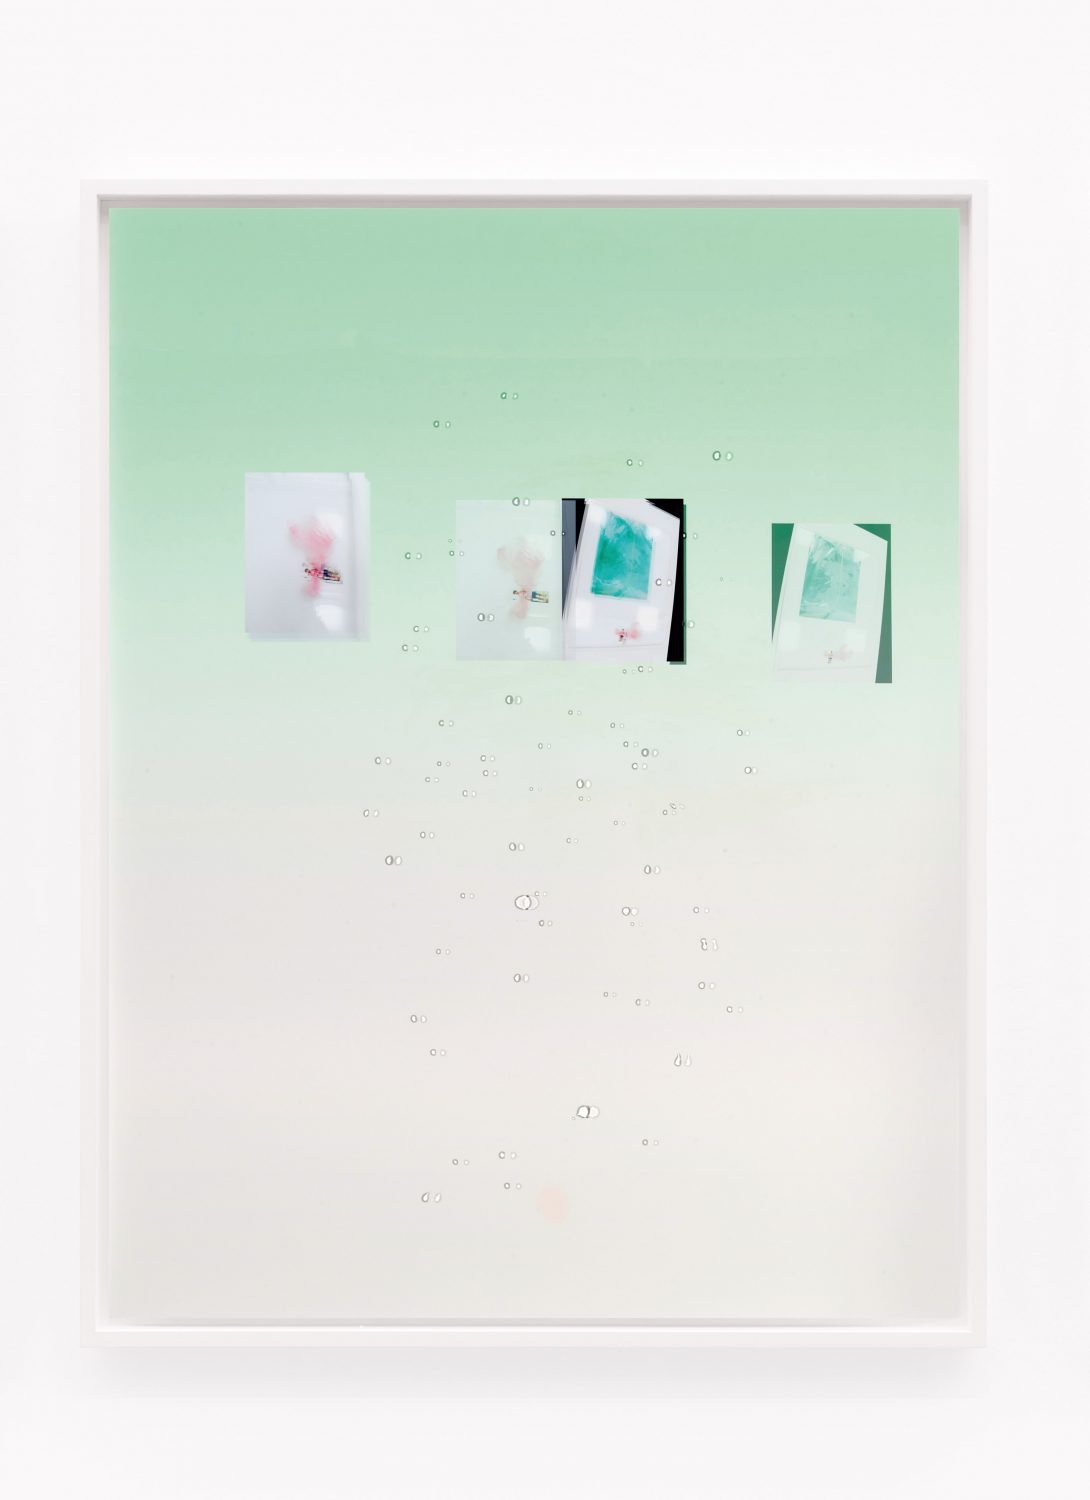 Lisa HolzerNude monochromes naked dream with Ei passing under spaghetti at Frieze, 2014Crystal Clear 202/1 polyurethane on glass, champagne and pigment print on cotton paper92 x 72 cm